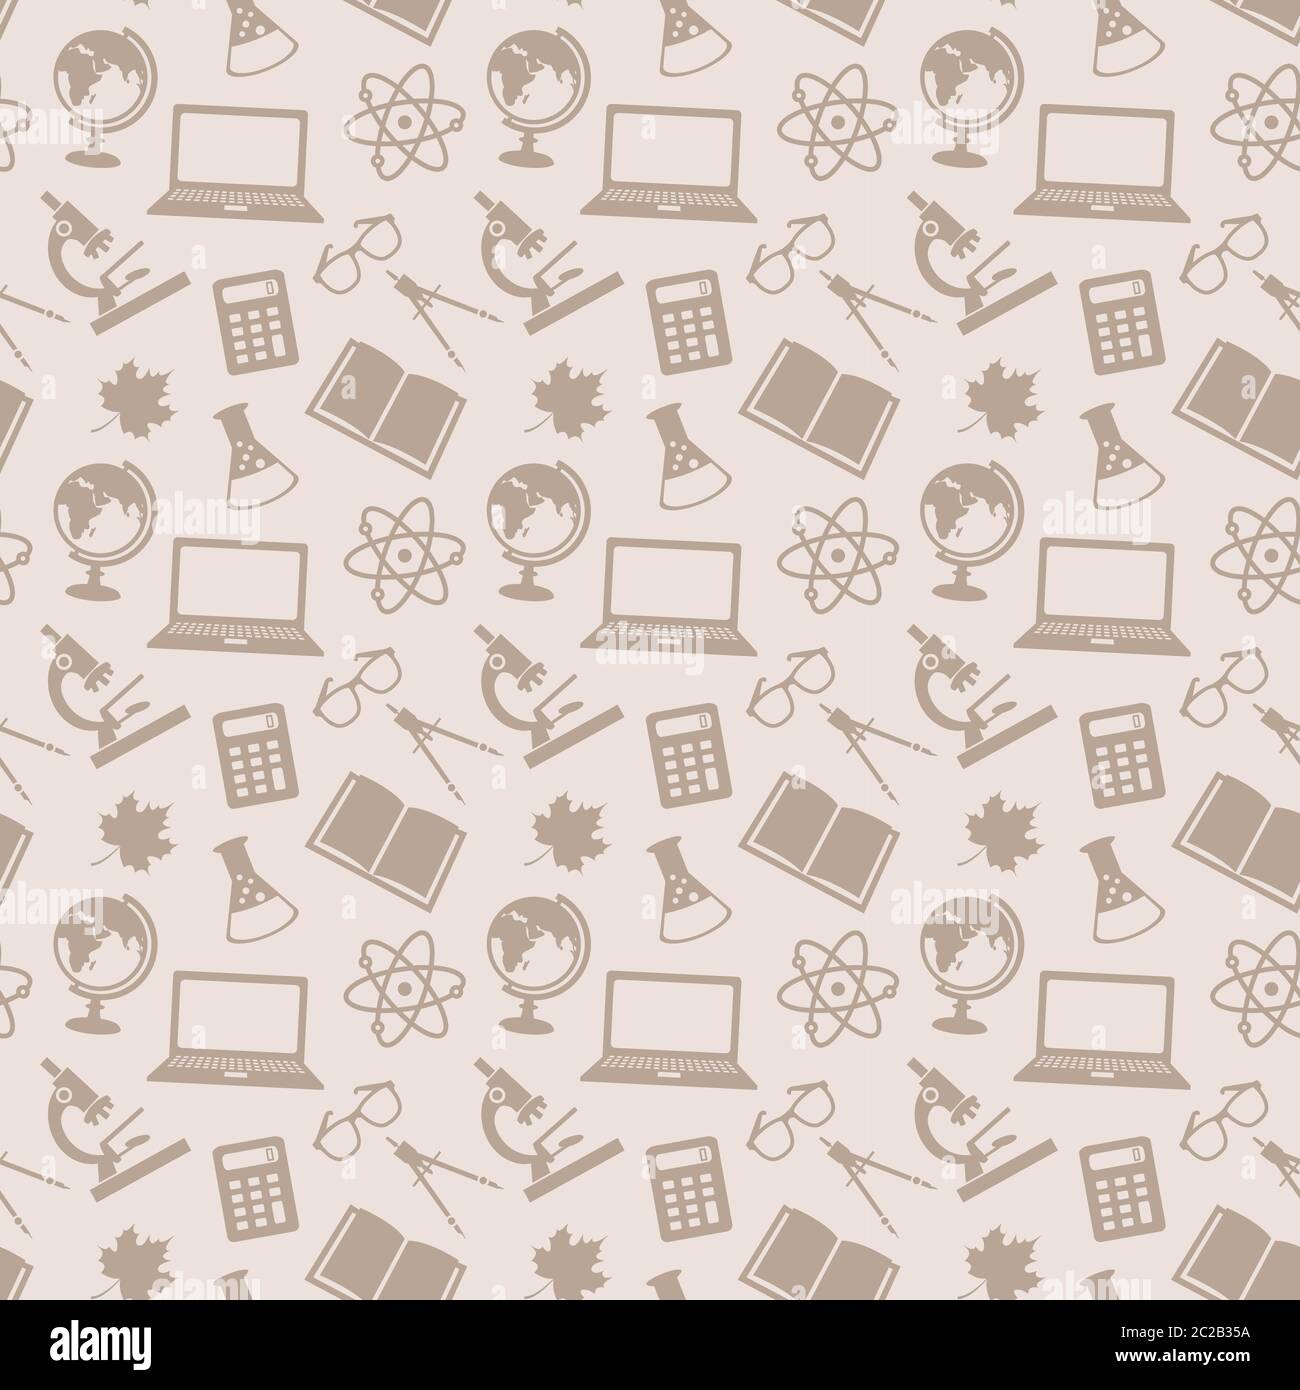 Back to school. Education seamless patterns with school icons. Vector background. Stock Vector